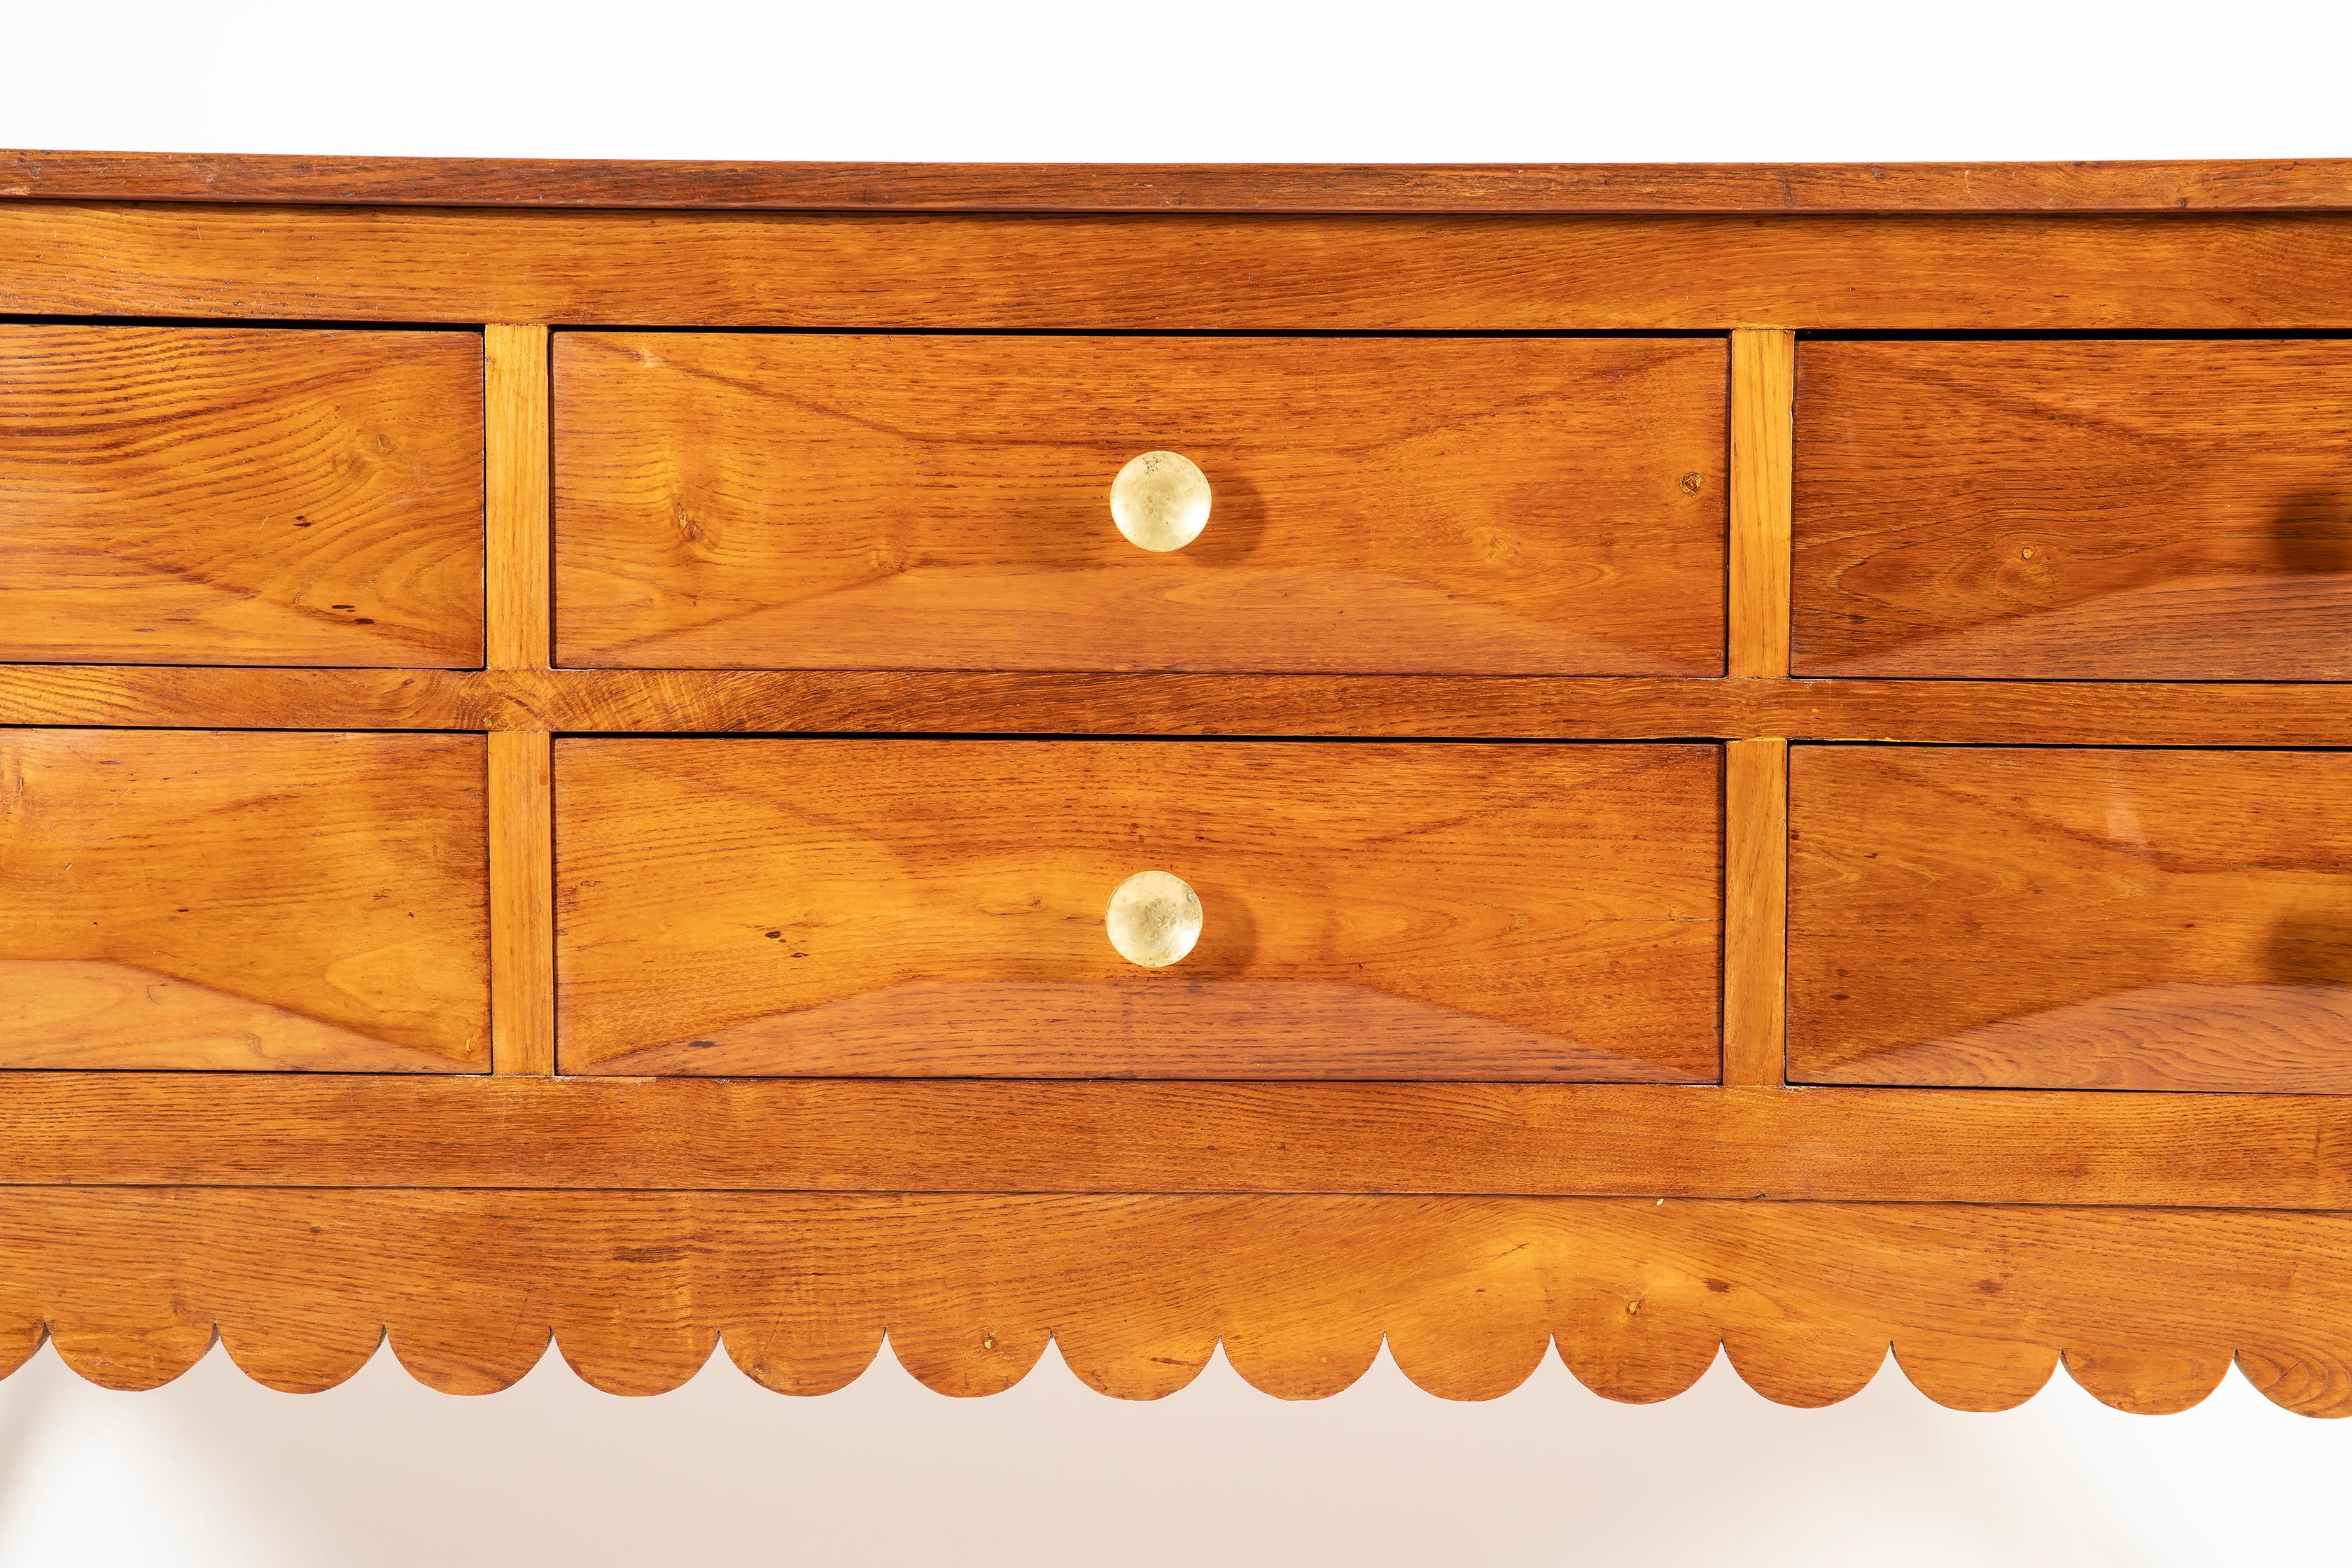 Extraordinary and rare solid oak credenza with scalloped edge details, featuring six rusticated ashlar-work drawers, for tapered legs ending in brass sabots and beautiful and original brass handlers. This credenza has been designed by Paolo Buffa in